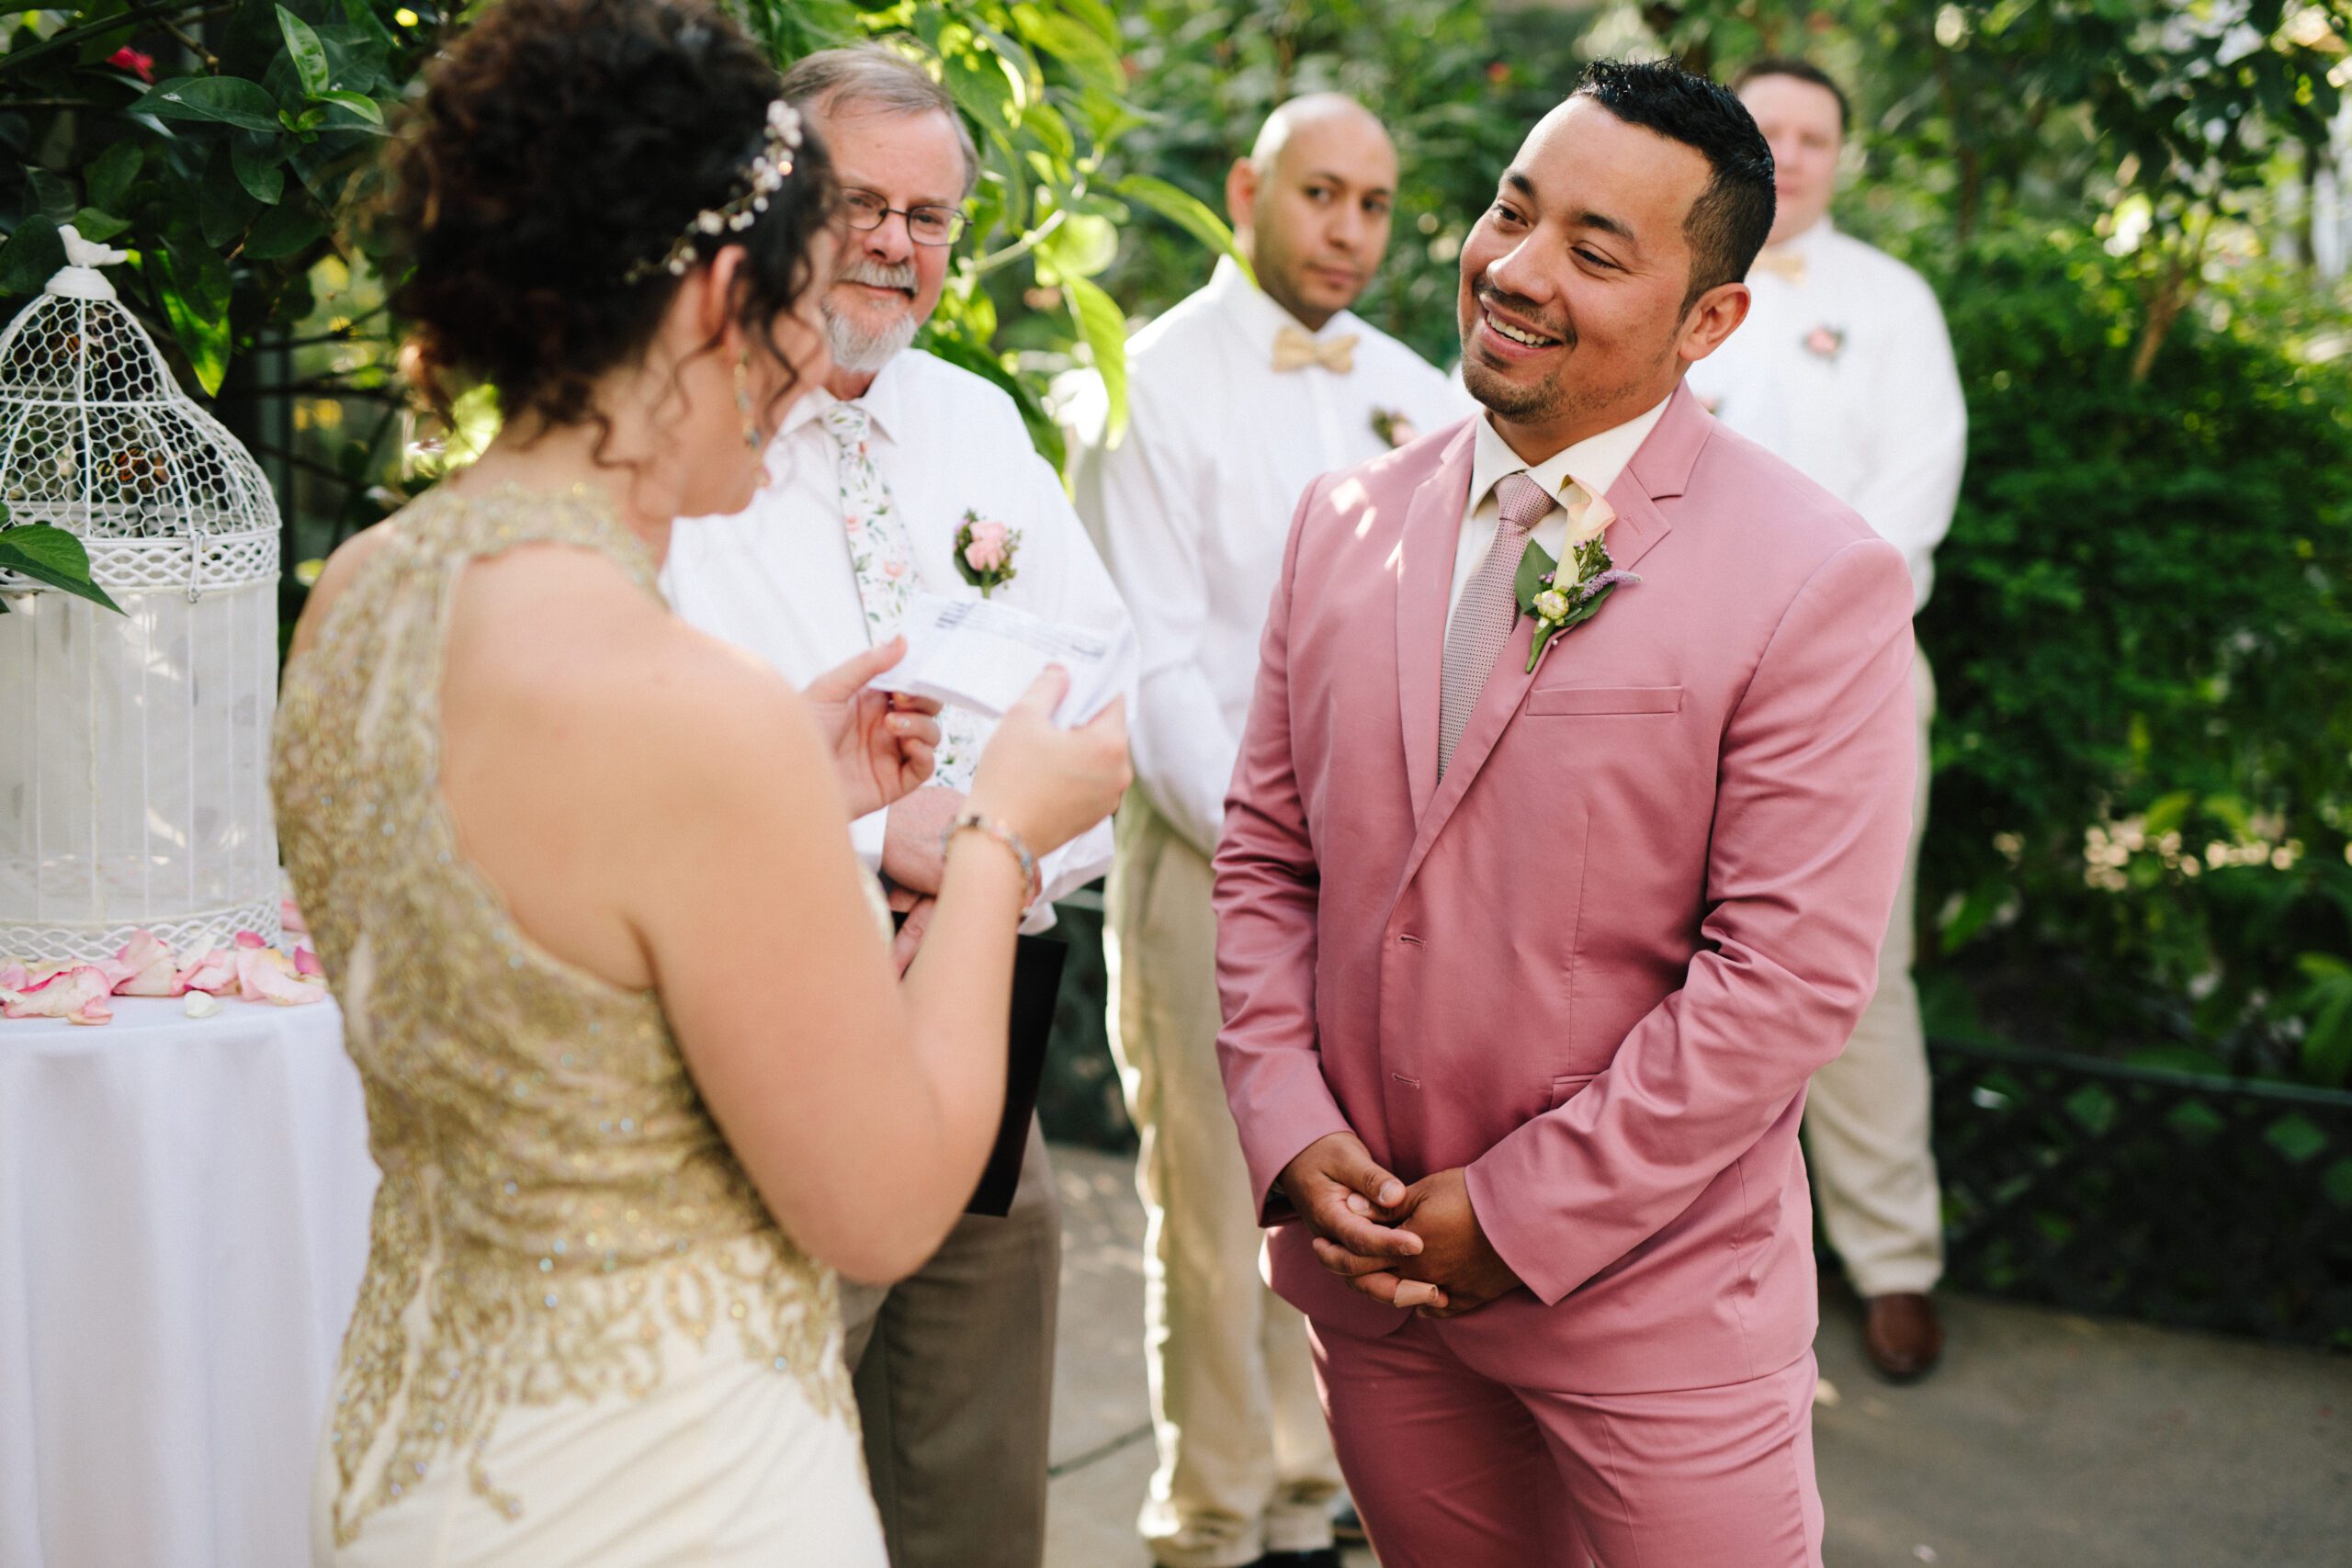 The gorgeous bride shares her vows with her groom who is smiling bright during their Butterfly Pavilion wedding. 